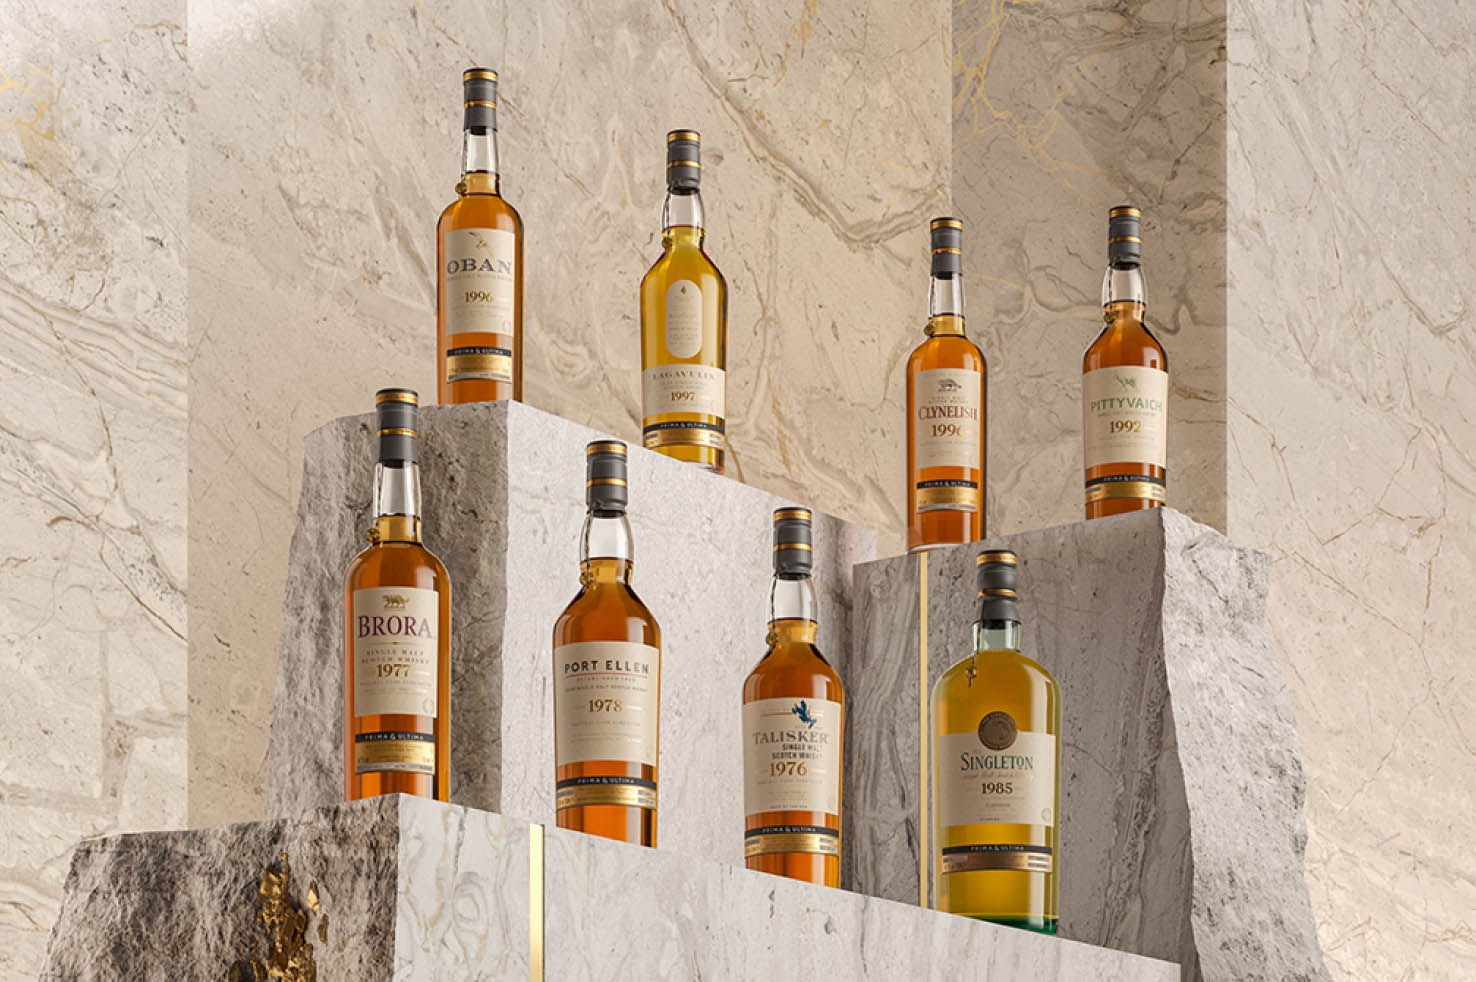 collection of whiskies displayed in a rock